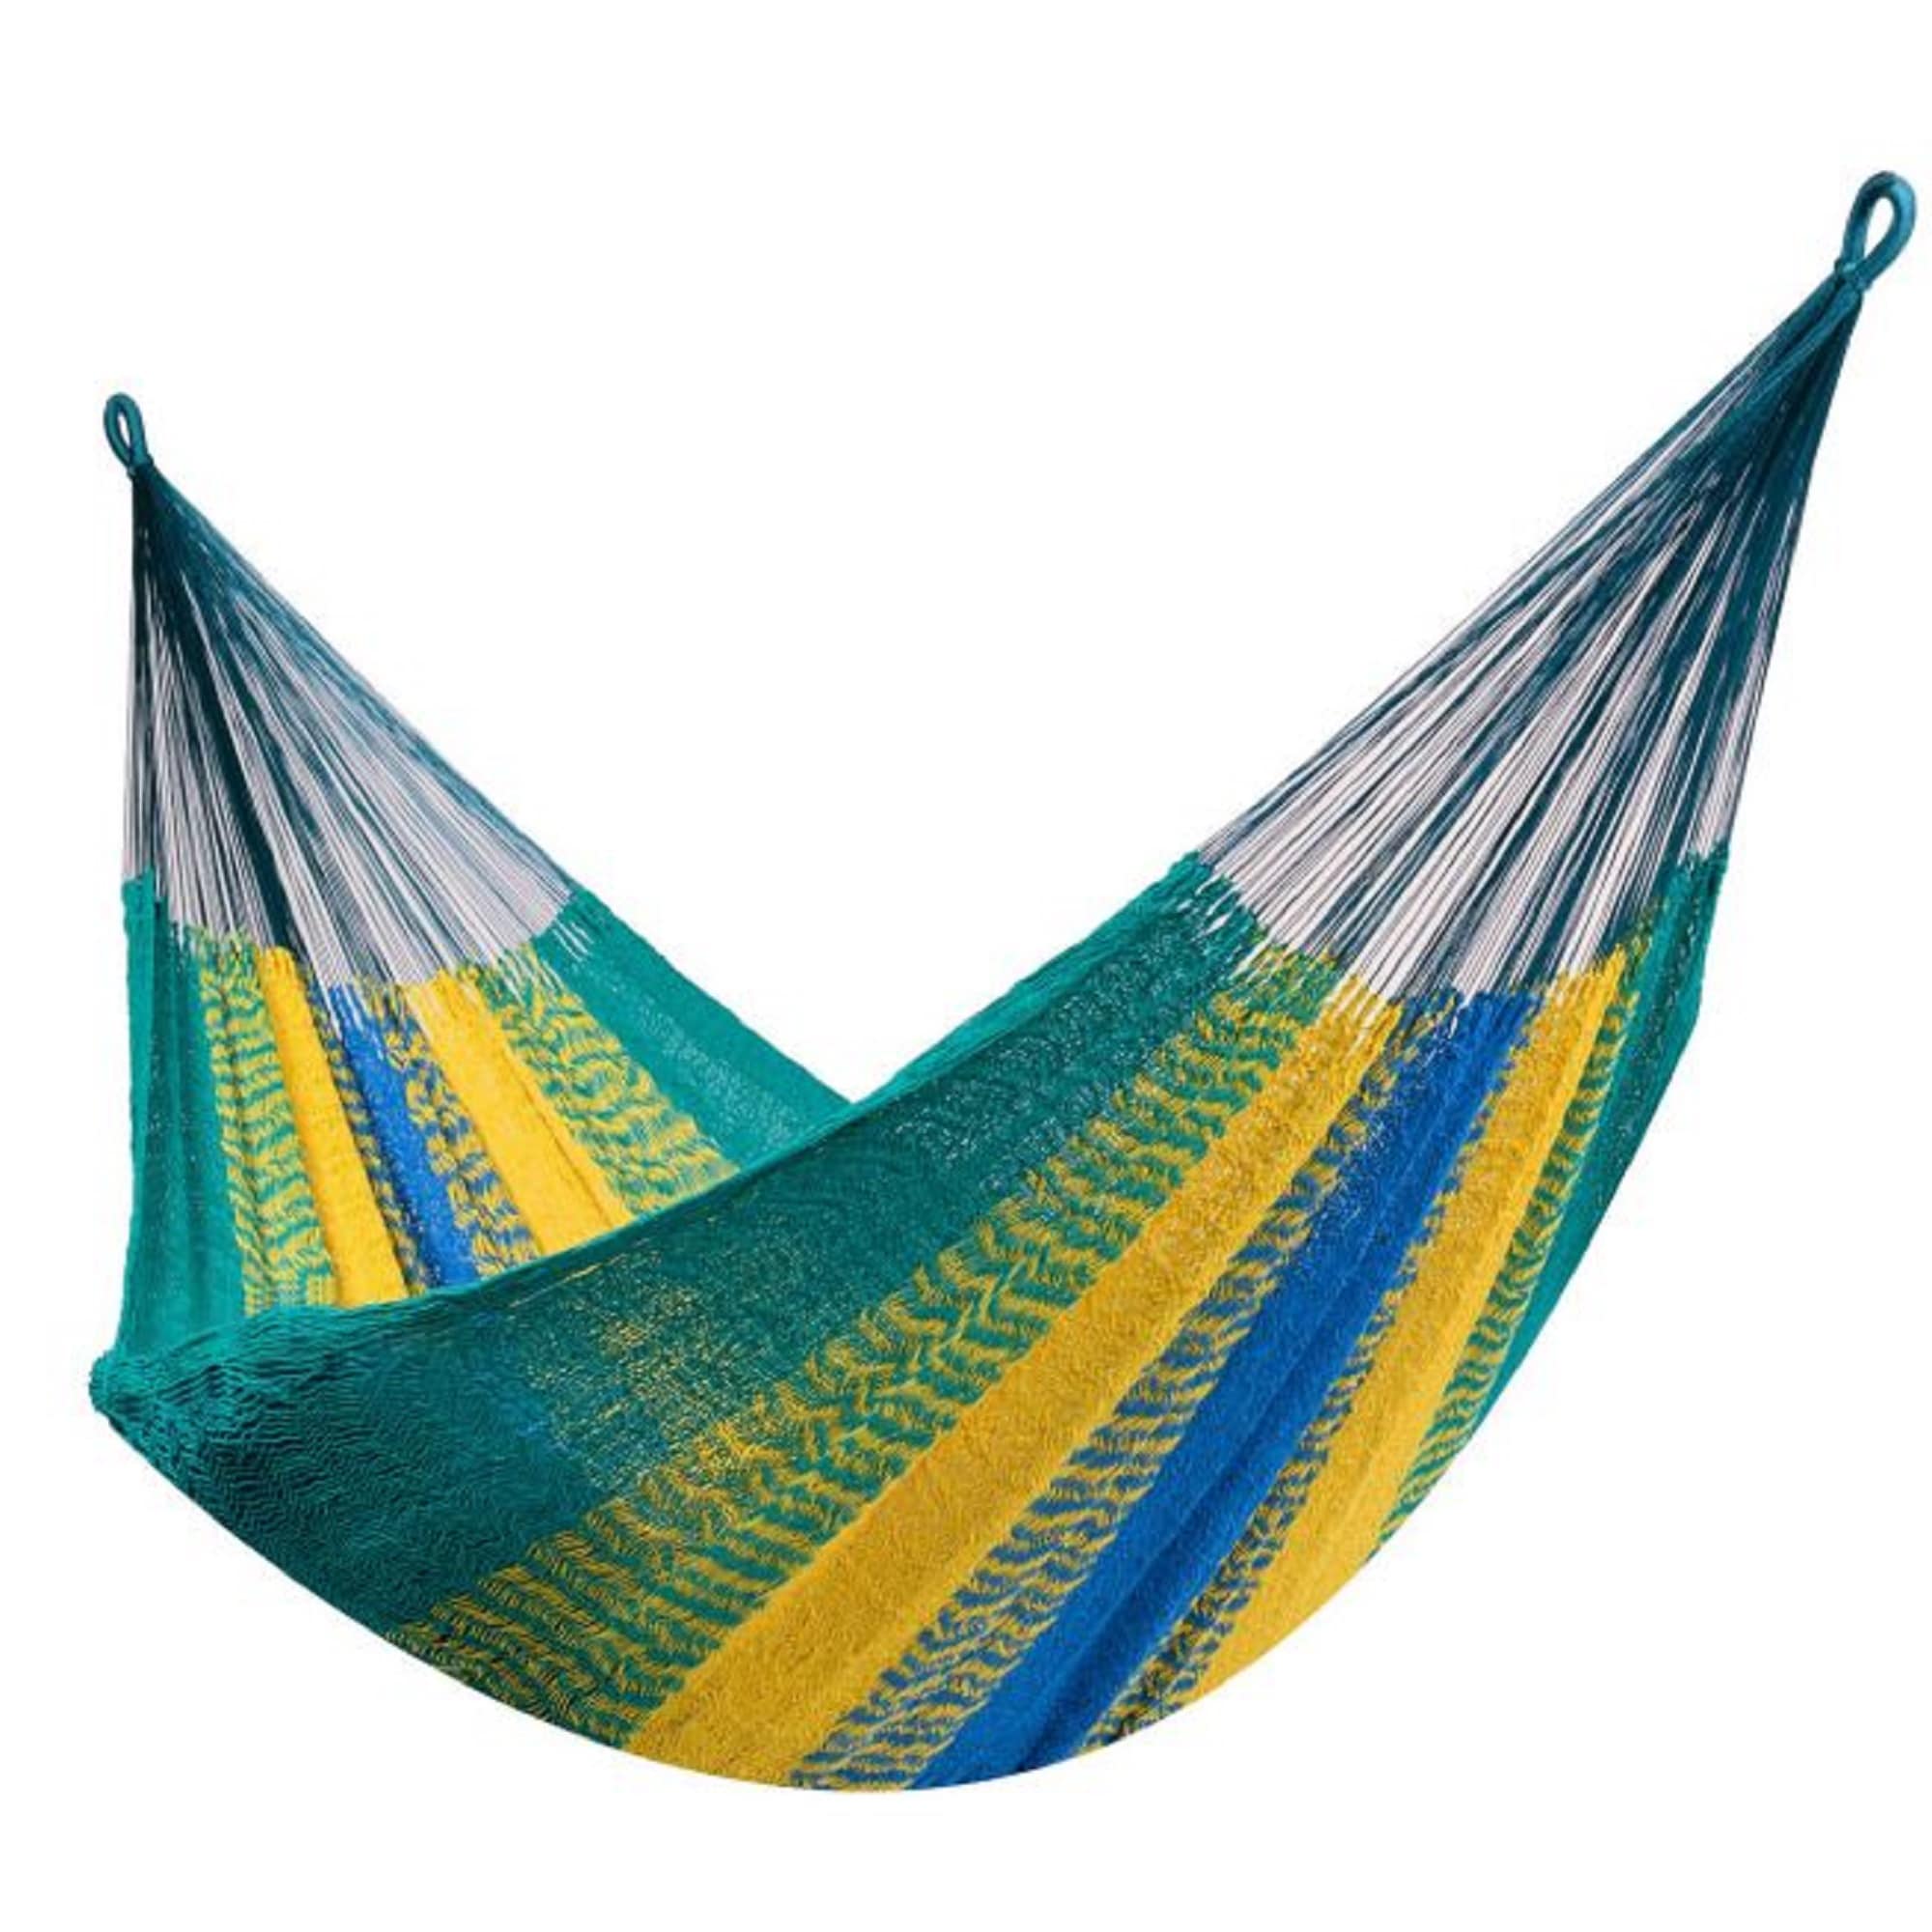 New Double Luxury Mayan Hammock Bed Cotton BLUE Outdoors Made In Mexico 